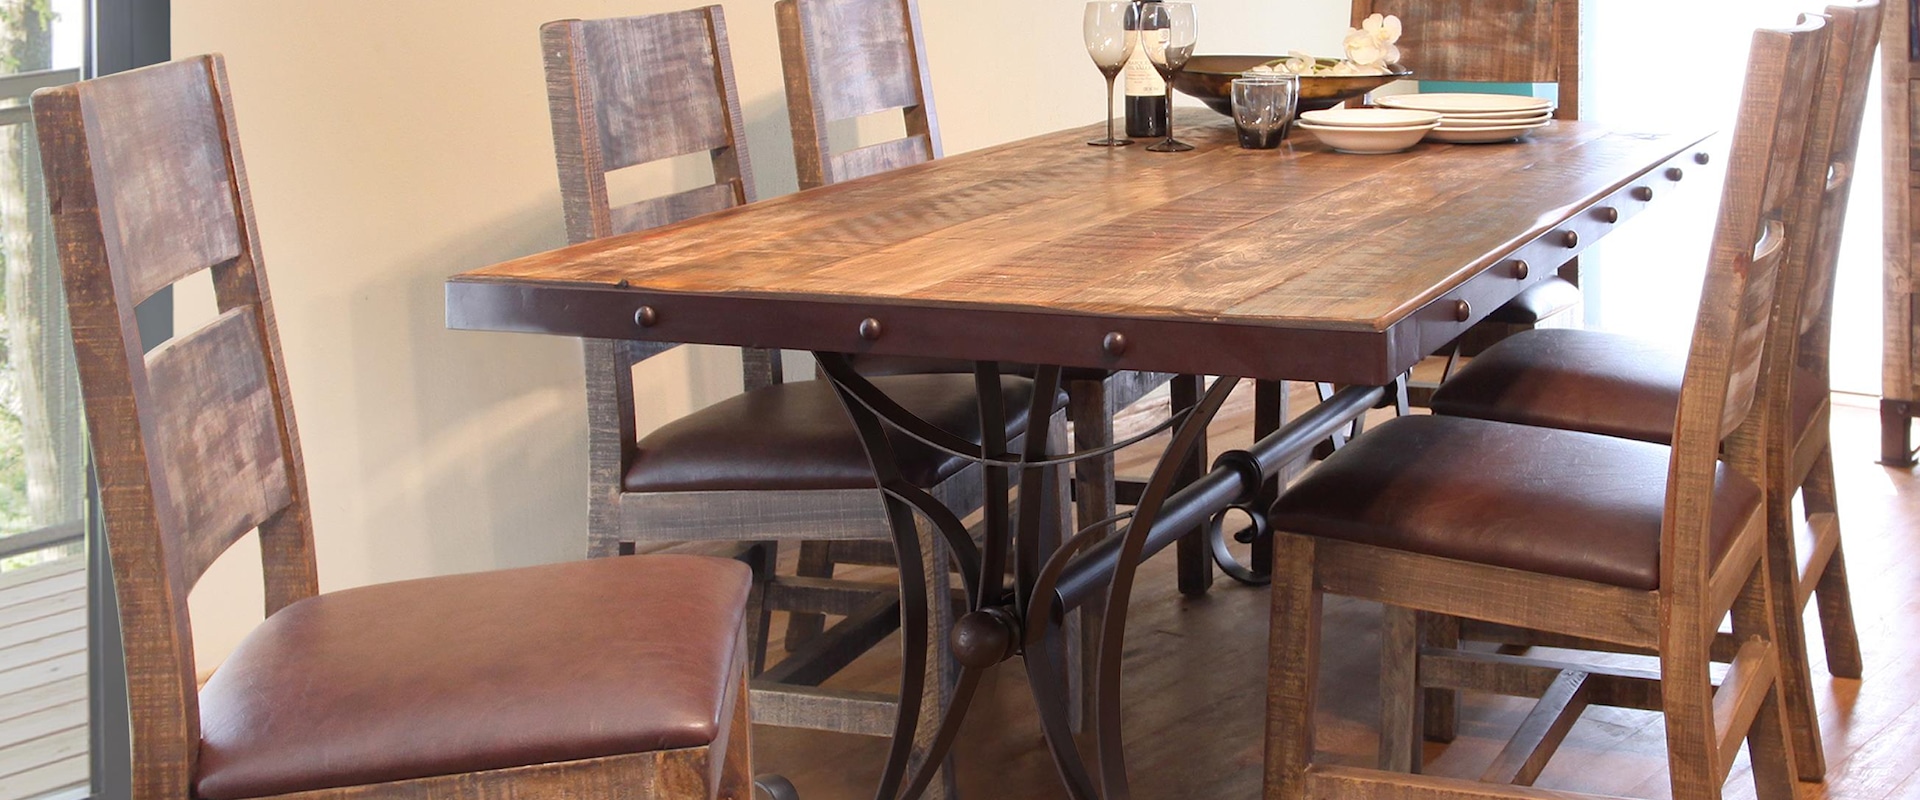 7 Piece Dining Set with Iron Trestle Table